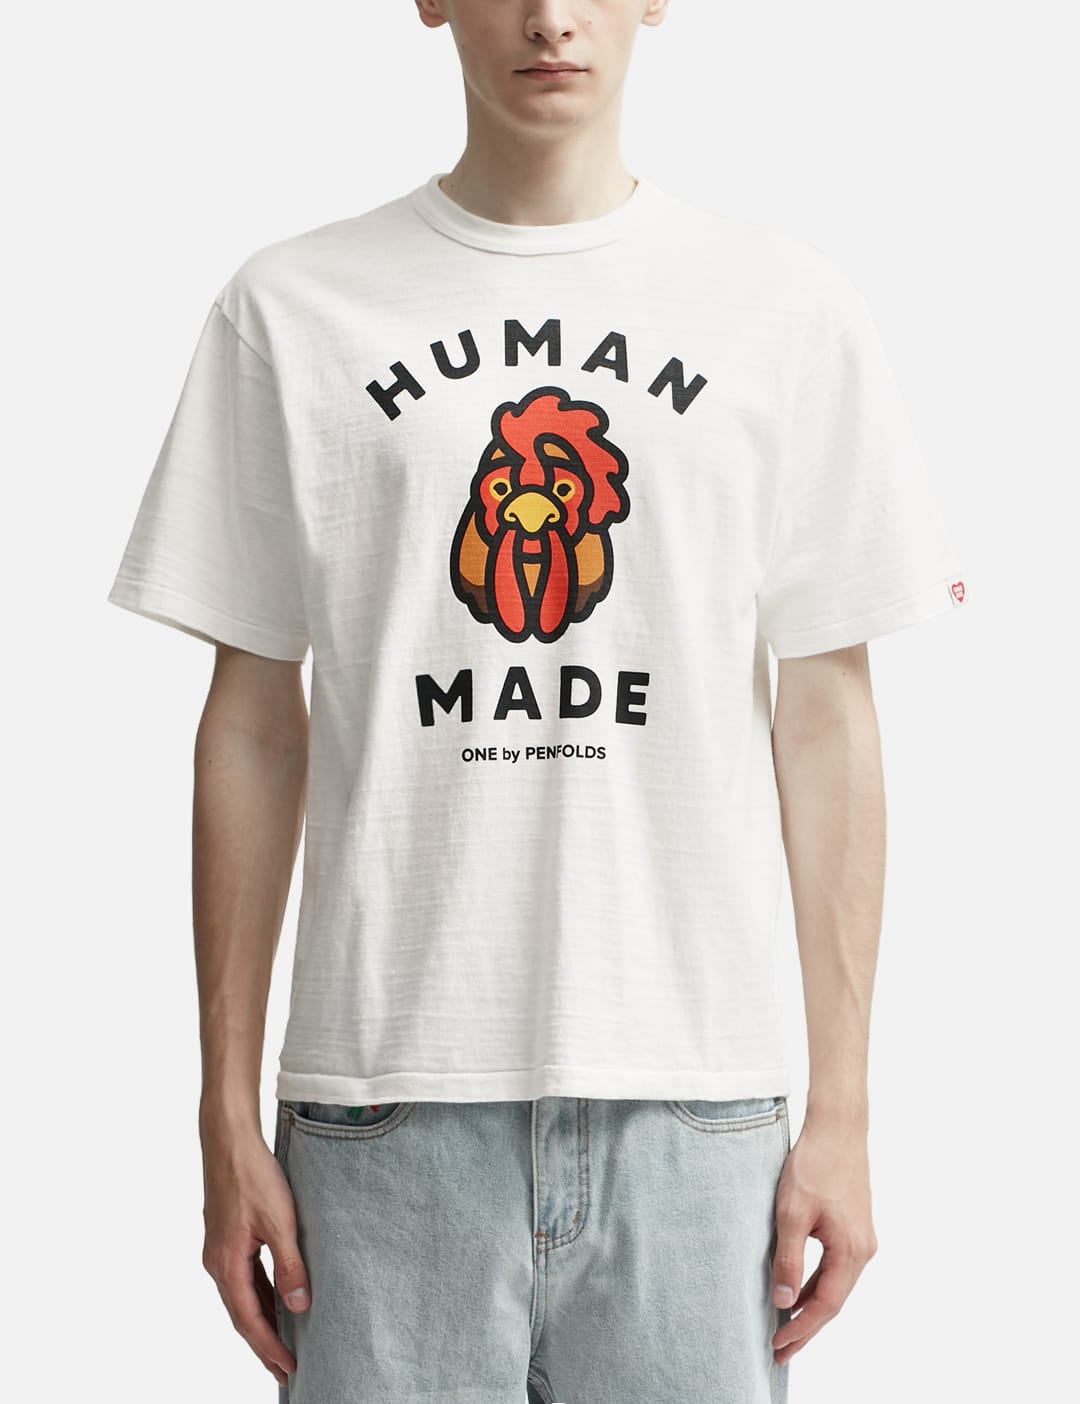 Human Made - One By Penfolds Rooster T-shirt | HBX - Globally 